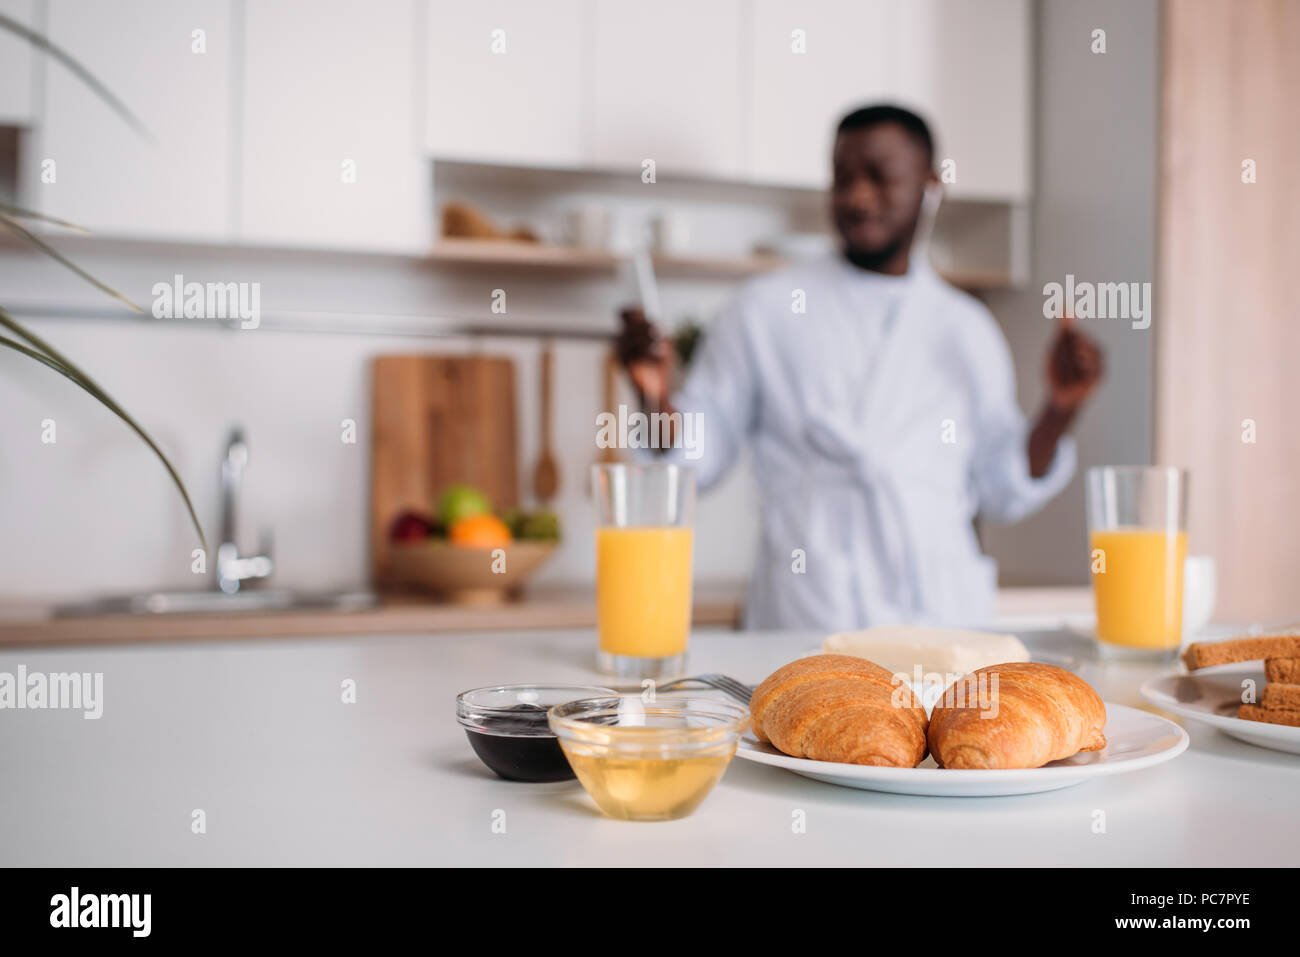 Close up view of croissants on plate, orange juice, jams and butter with young man in earphones on blurred background Stock Photo